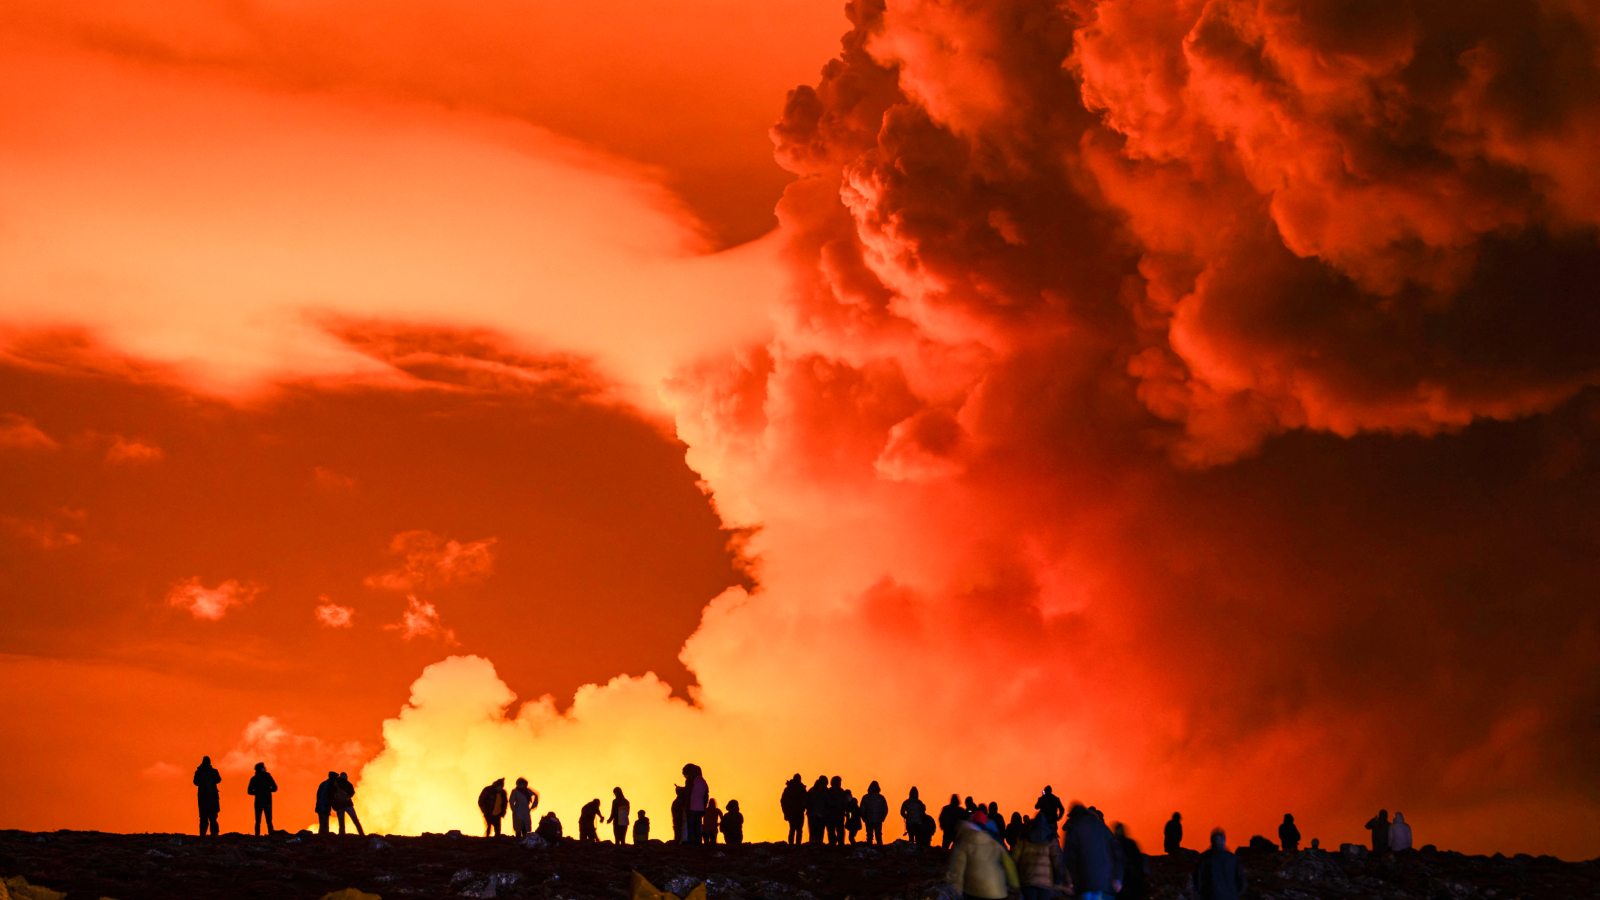 Silhuoettes of people standing infront of the bright orange sky that has volcanic gas clouds in the air.